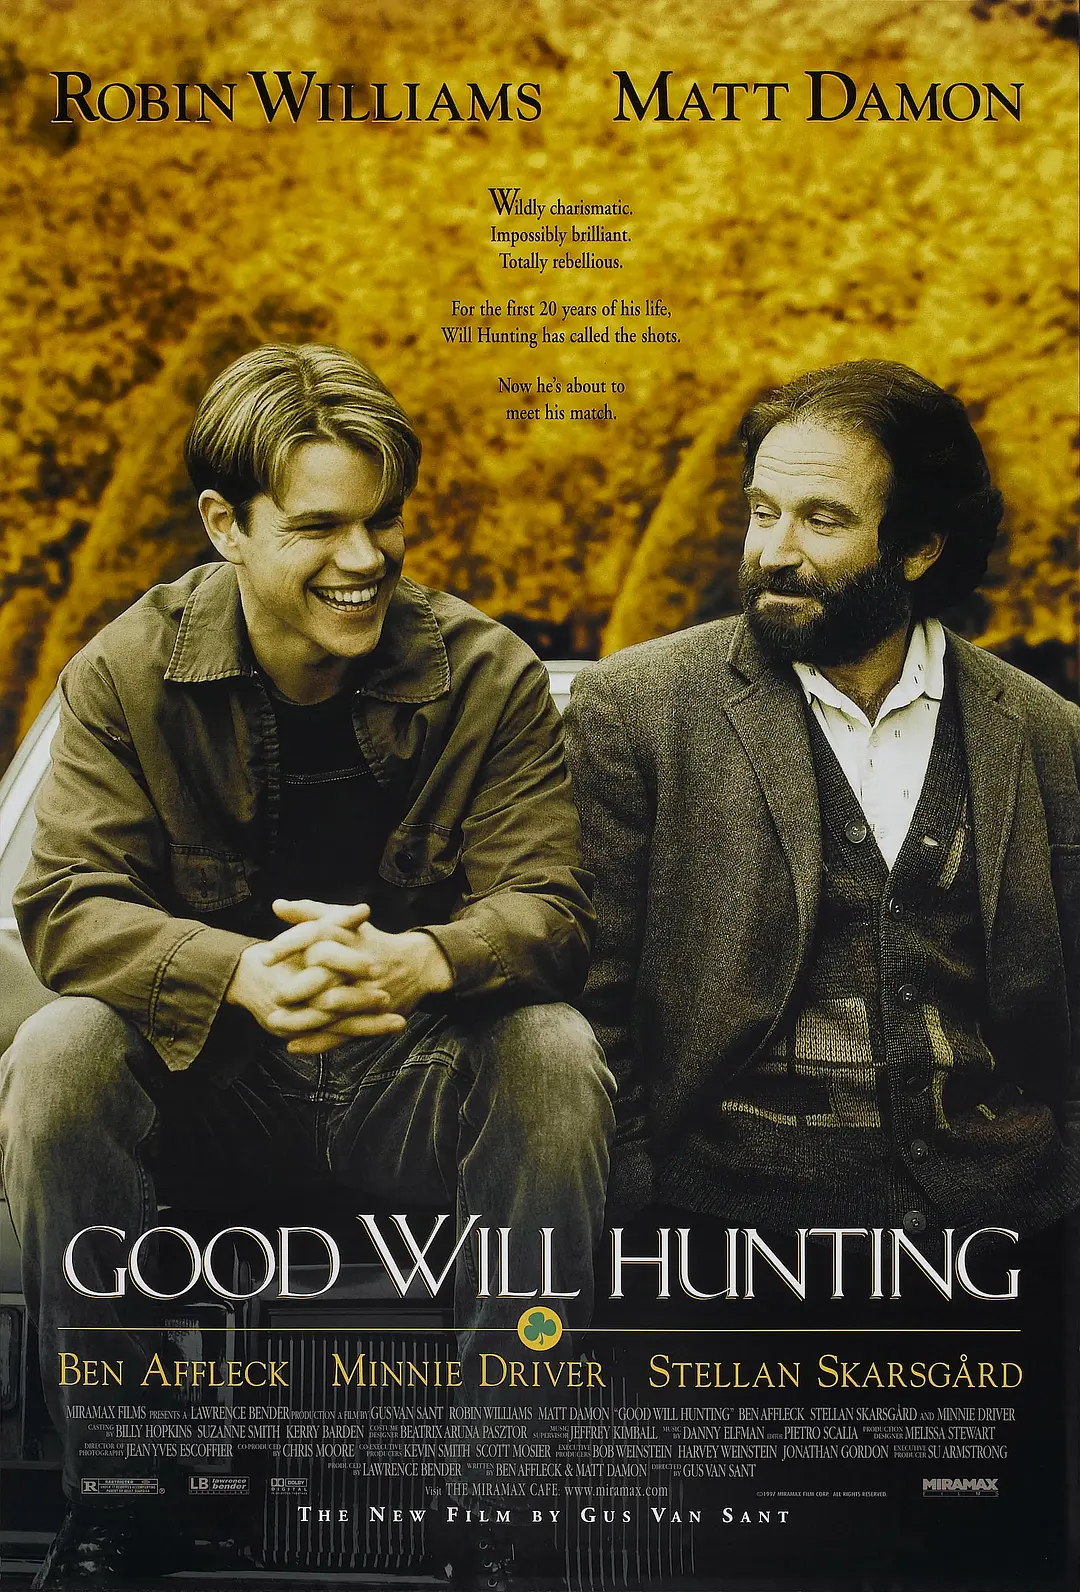 Good Will Hunting One Story About Love And Friendship Of A Mathematical Genius 英文影评 知乎